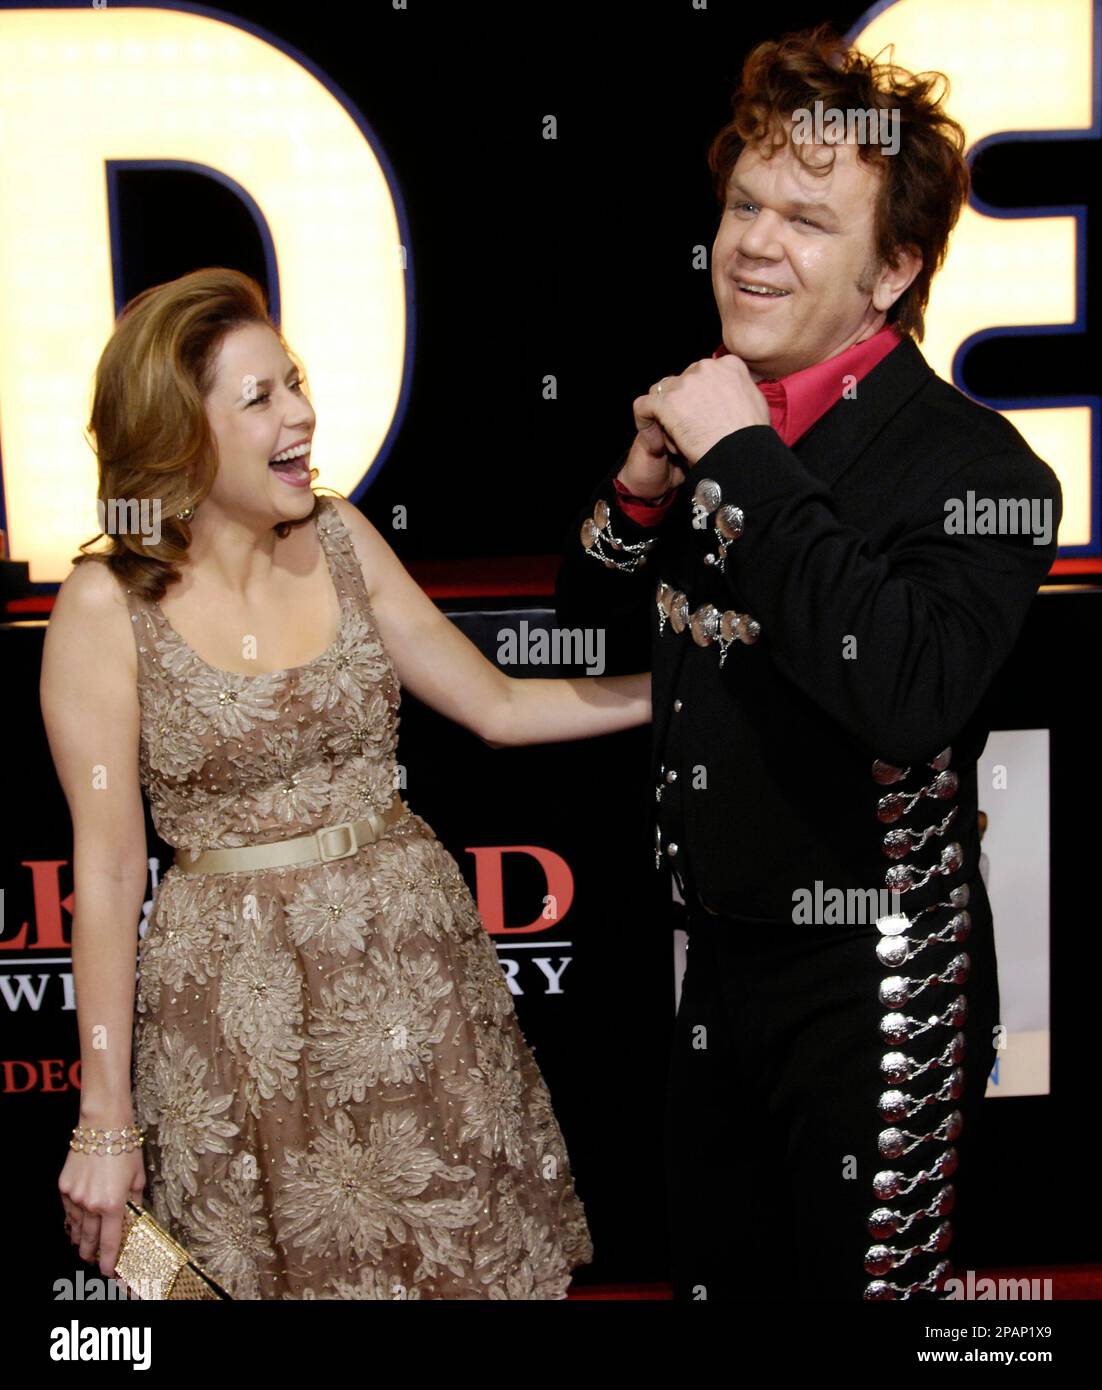 Actor John C. Reilly, who plays musician Dewey Cox in "Walk Hard: The Dewey  Cox Story," shares a laugh with fellow cast member Jenna Fischer at the  premiere of the film in